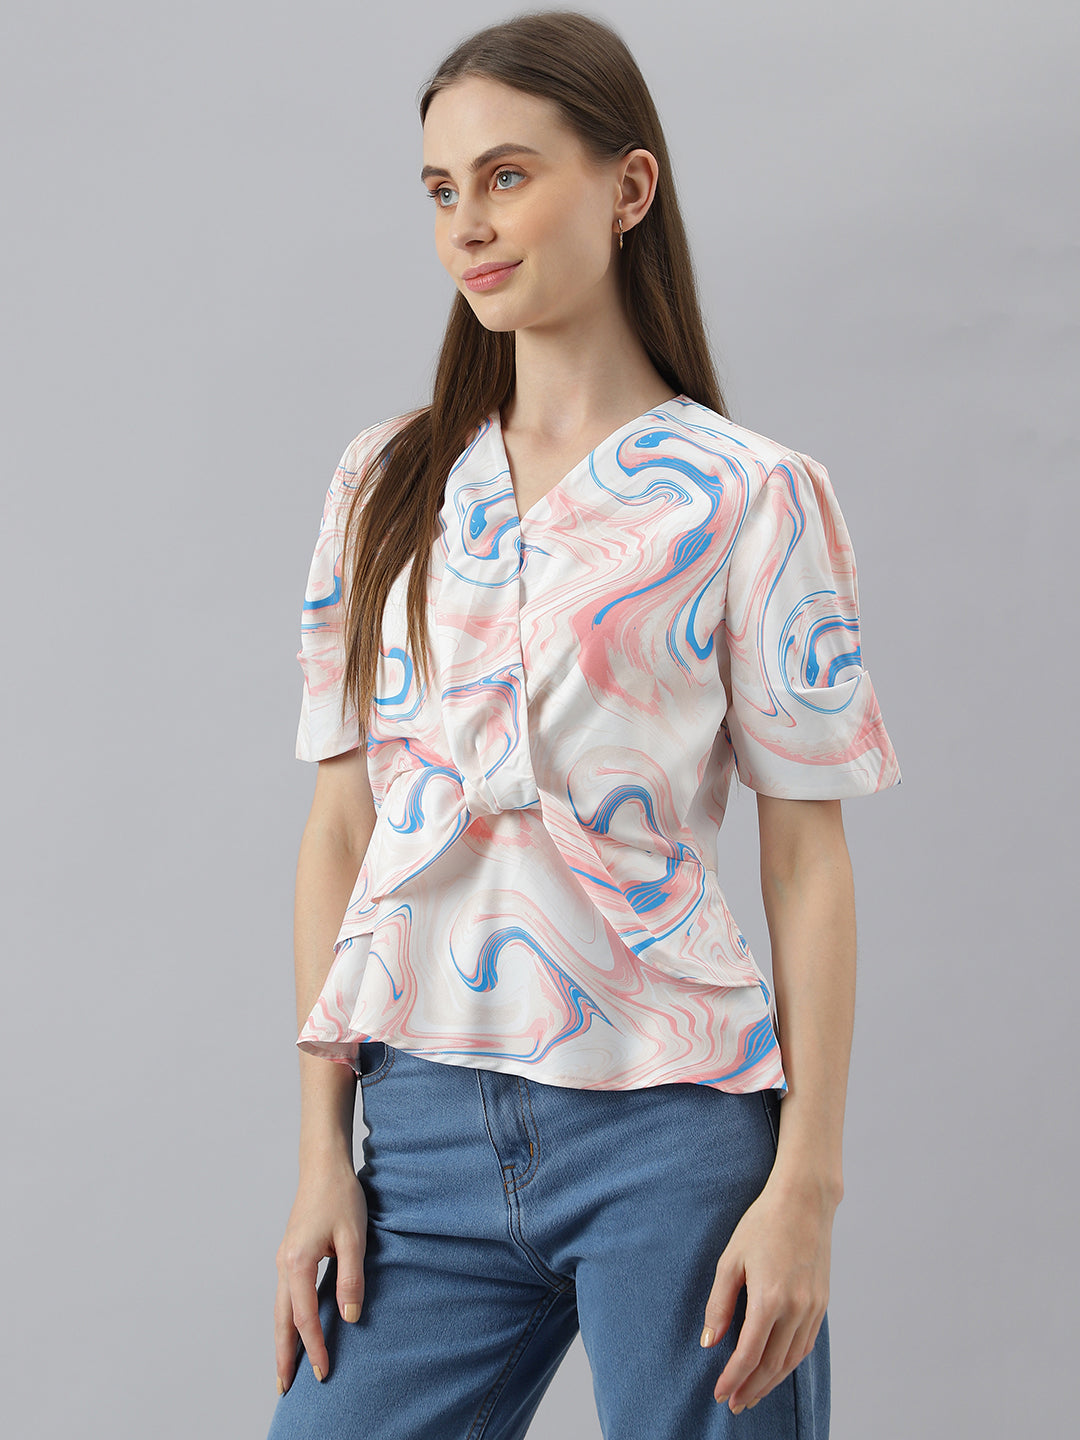 Peach Half Sleeve V-Neck Women Blouse Top for Casual